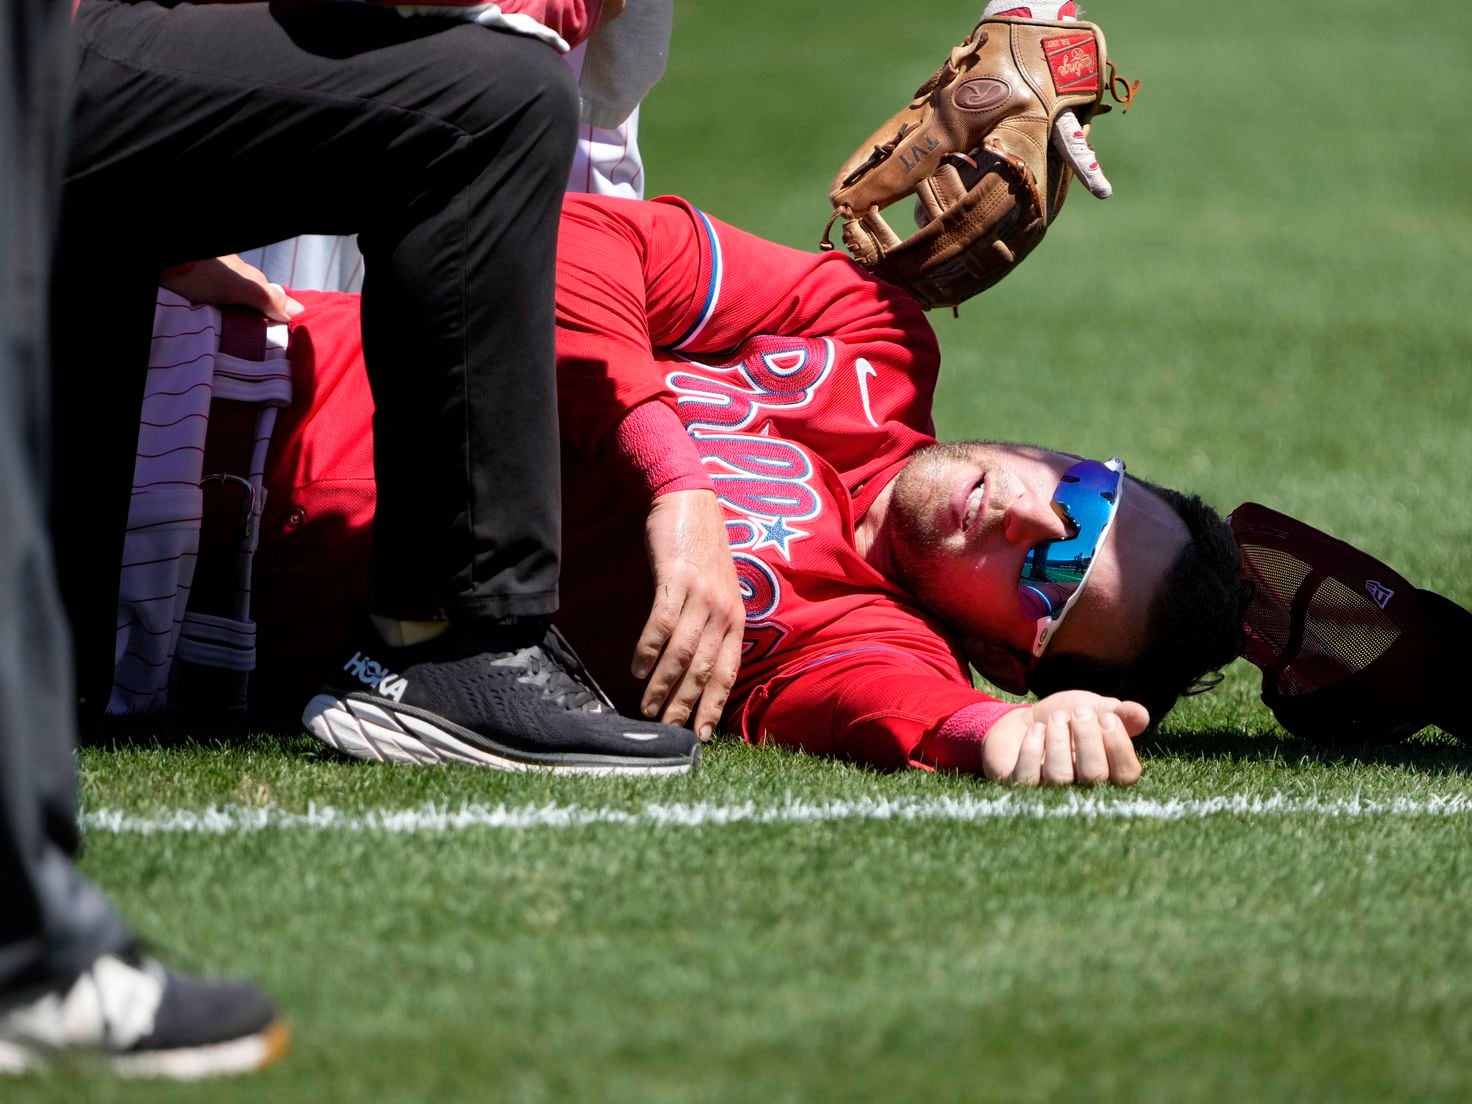 Rhys Hoskins carted off field with frightening knee injury at